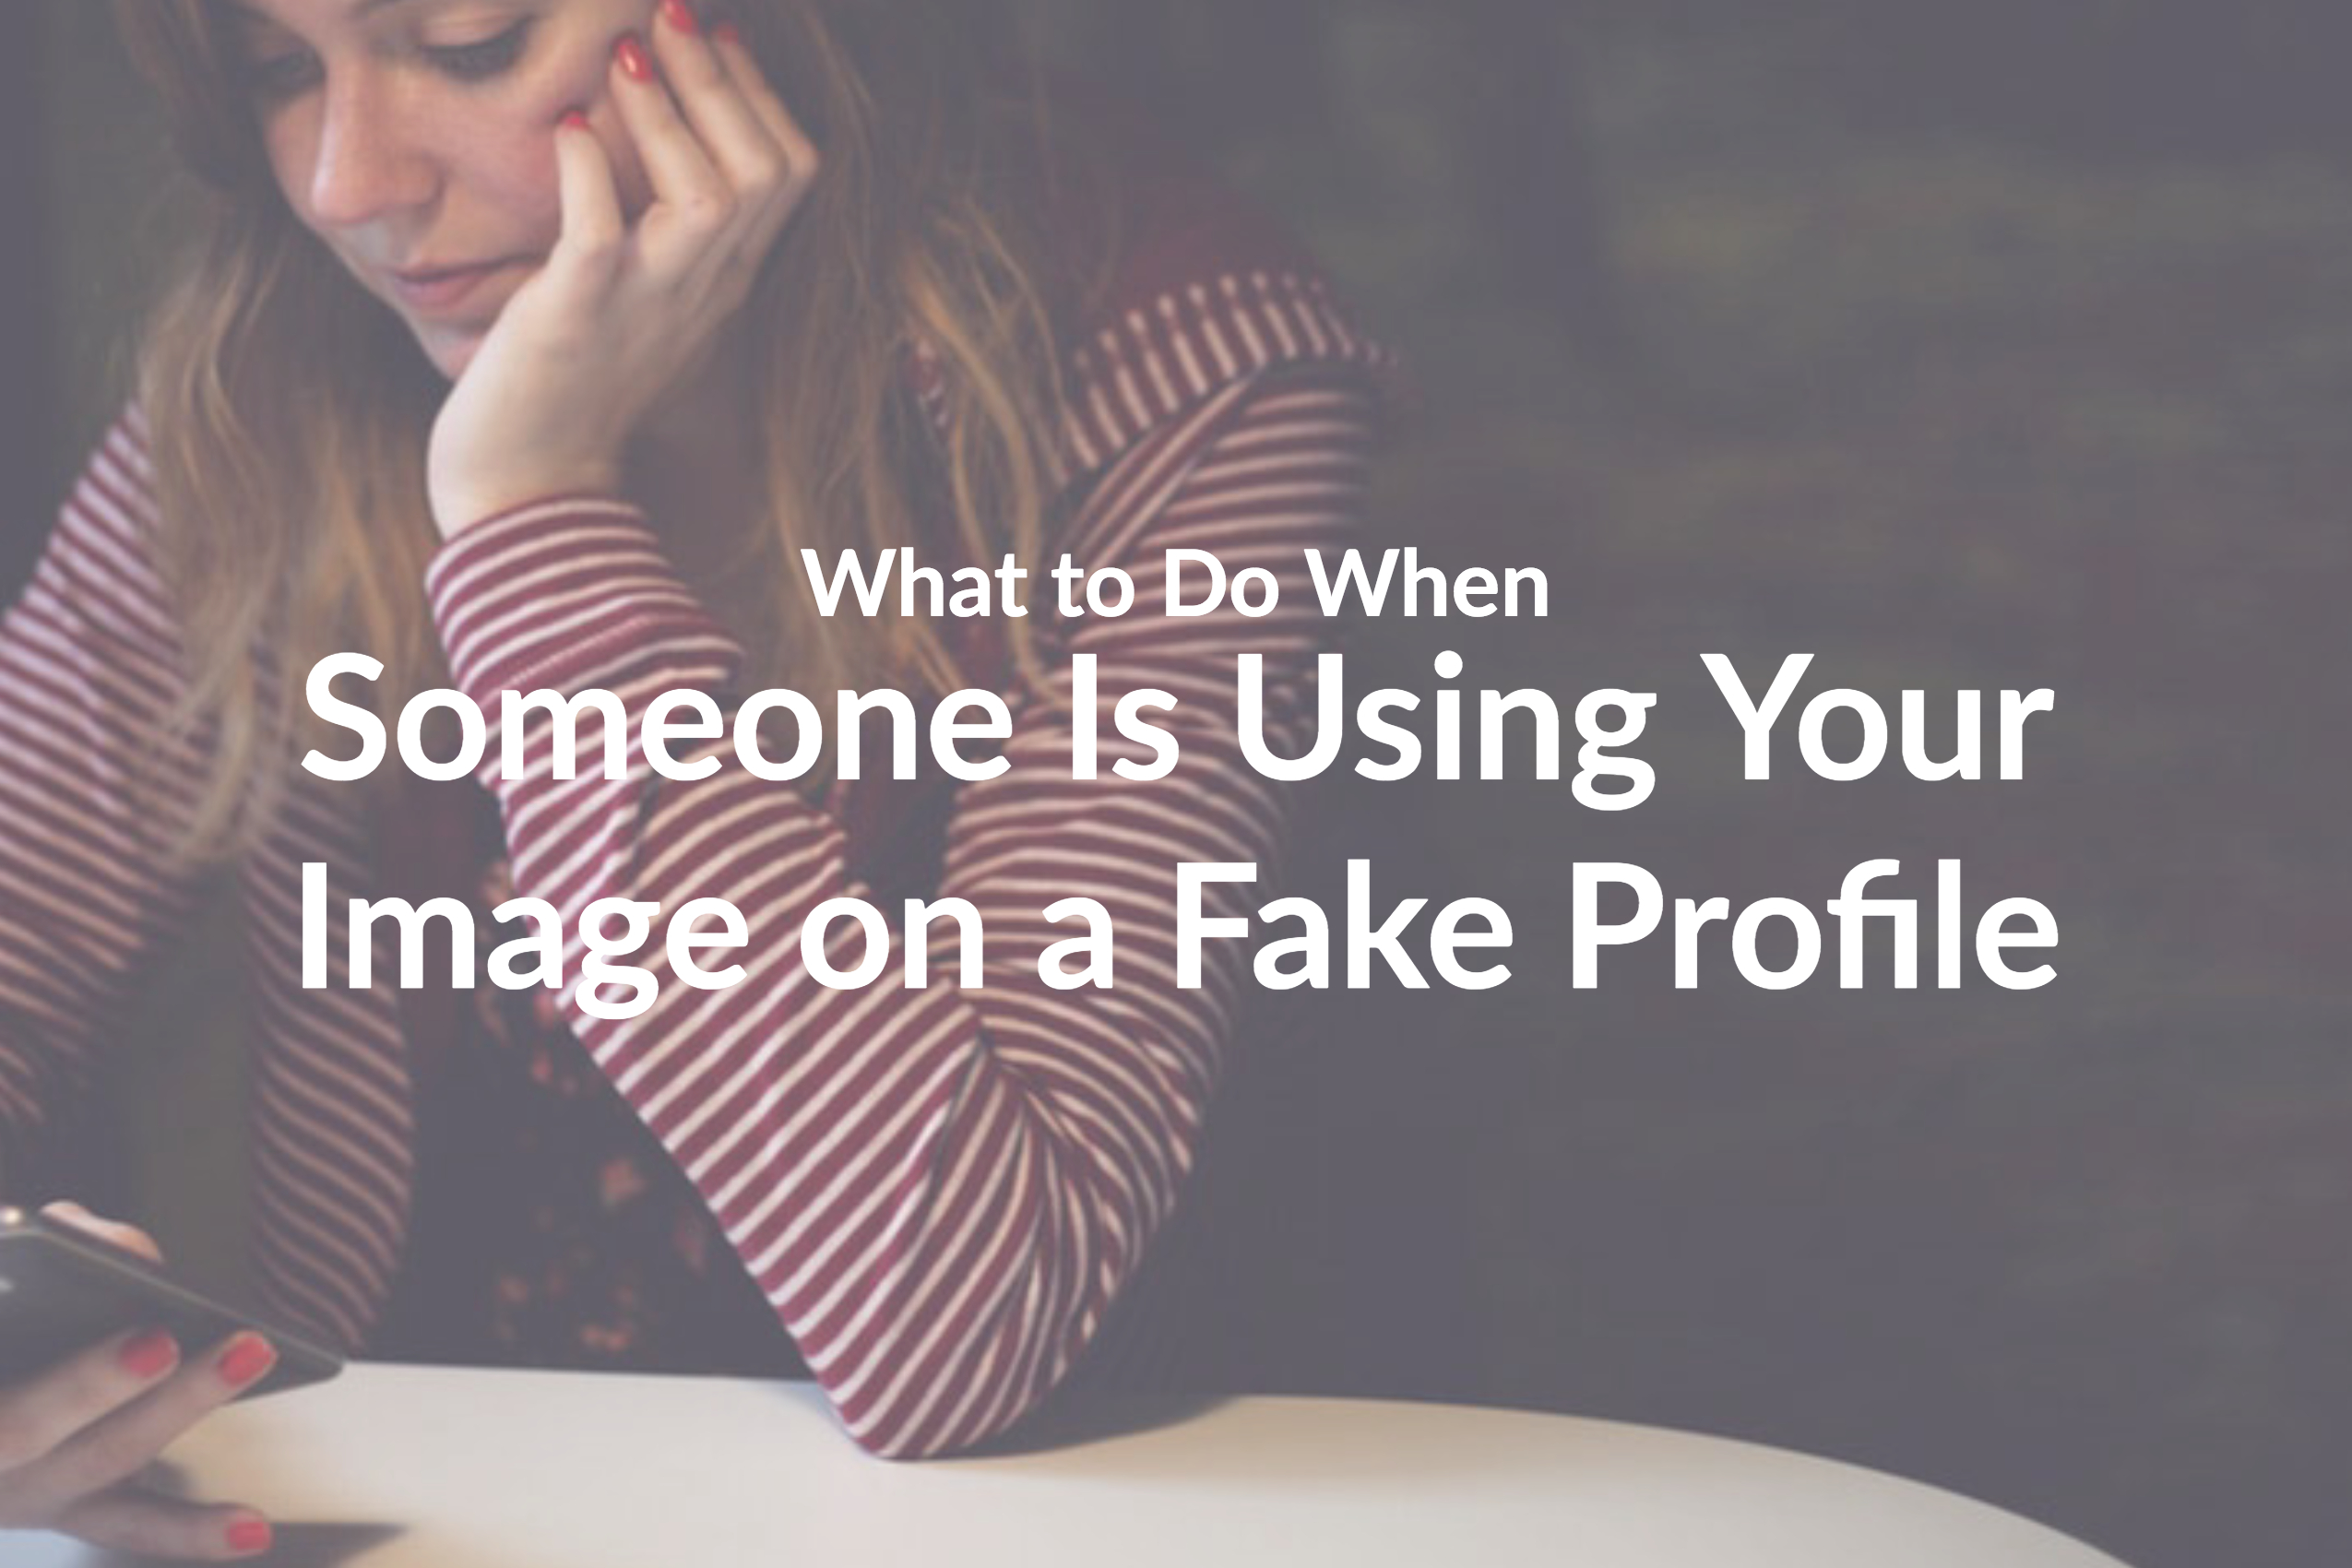 What to Do When Someone Is Using Your Image on a Fake Profile